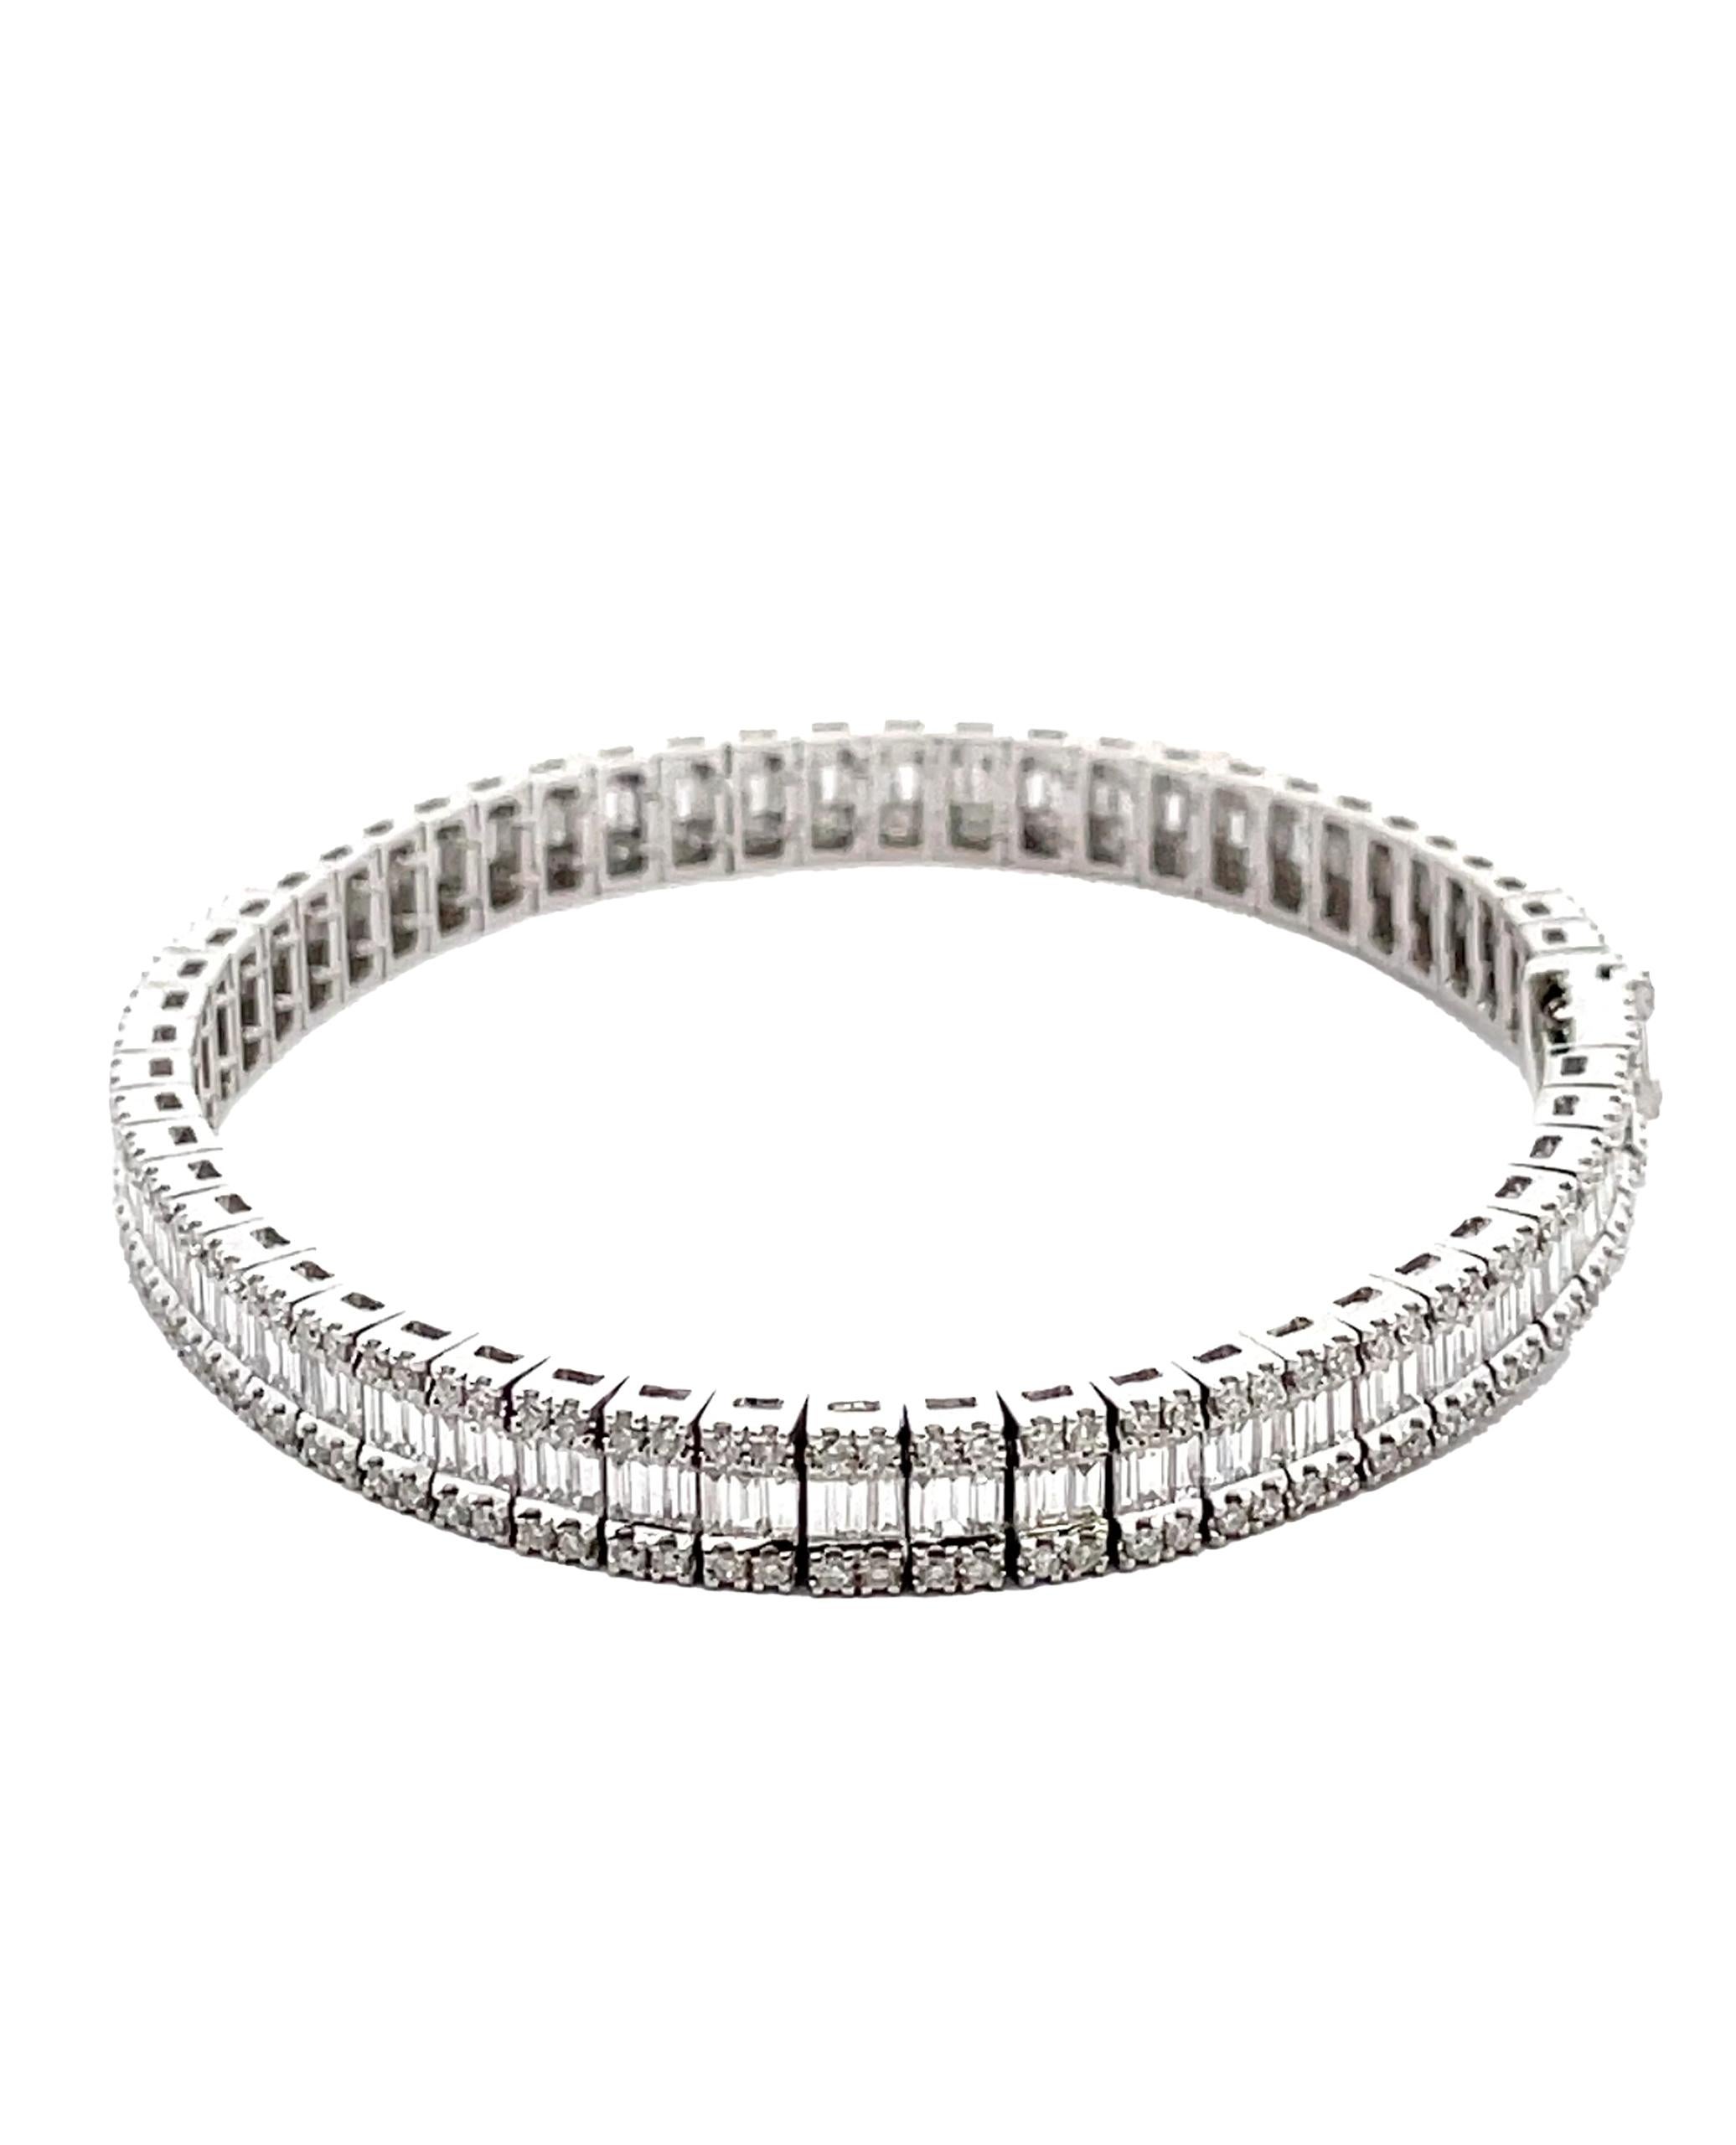 14K white gold tennis bracelet with 232 round brilliant-cut diamonds weighing 1.57 carats total and 174 straight baguette diamonds weighing 3.05 carats total.

* 7 inches long
* G/H color, SI clarity